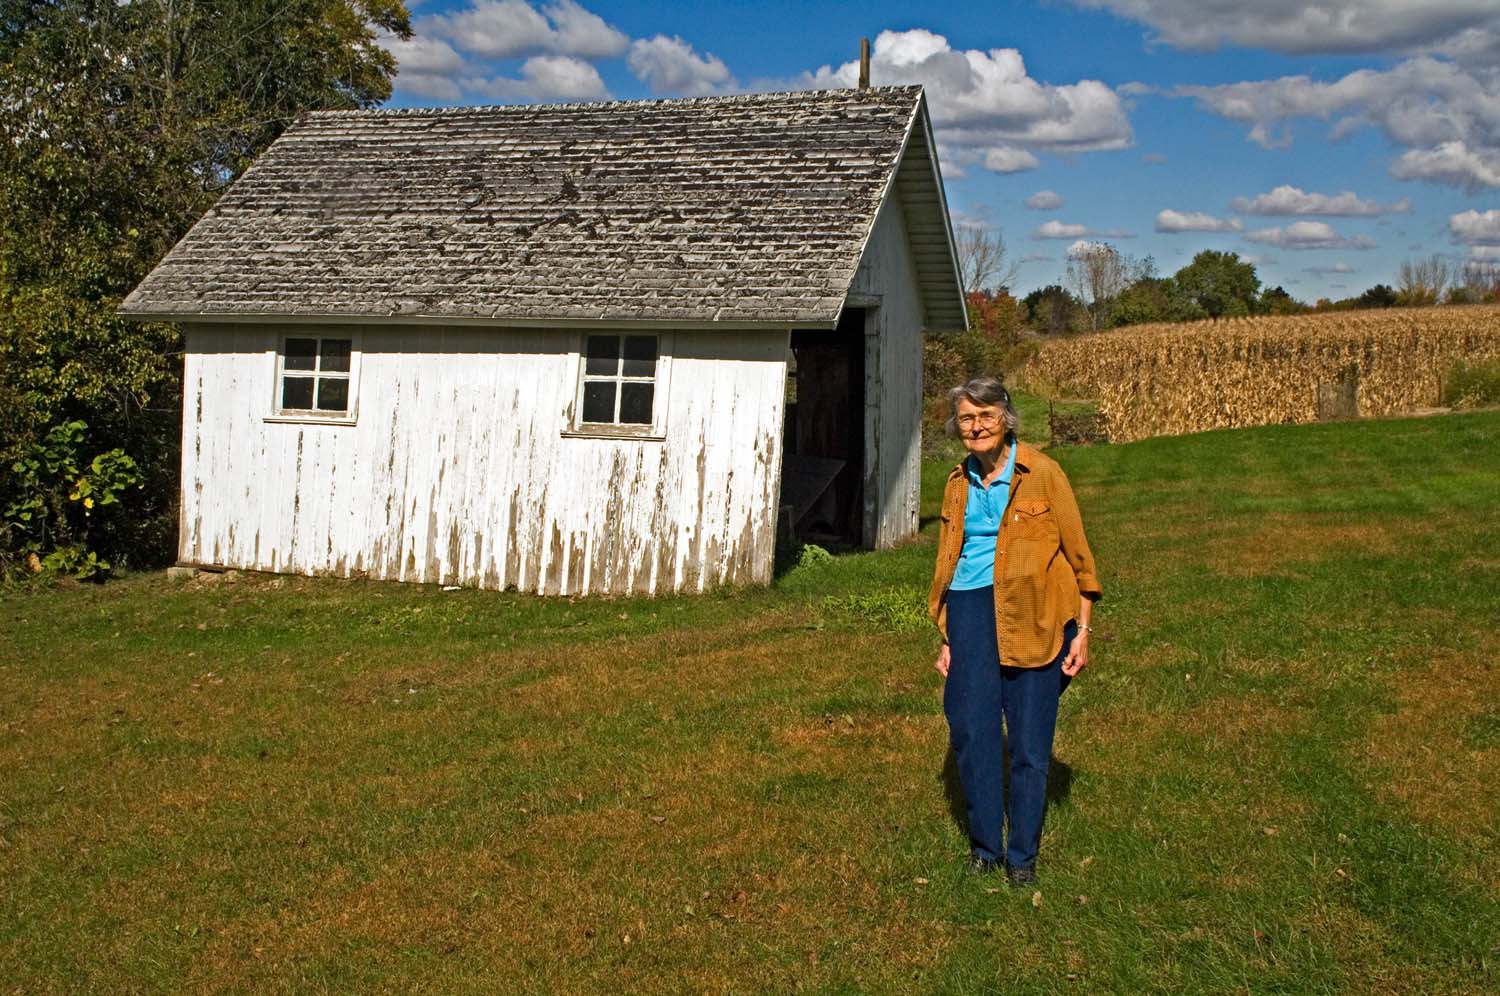  Mimi Lawton, standing in her yard. Plymouth, IL. October, 2009  